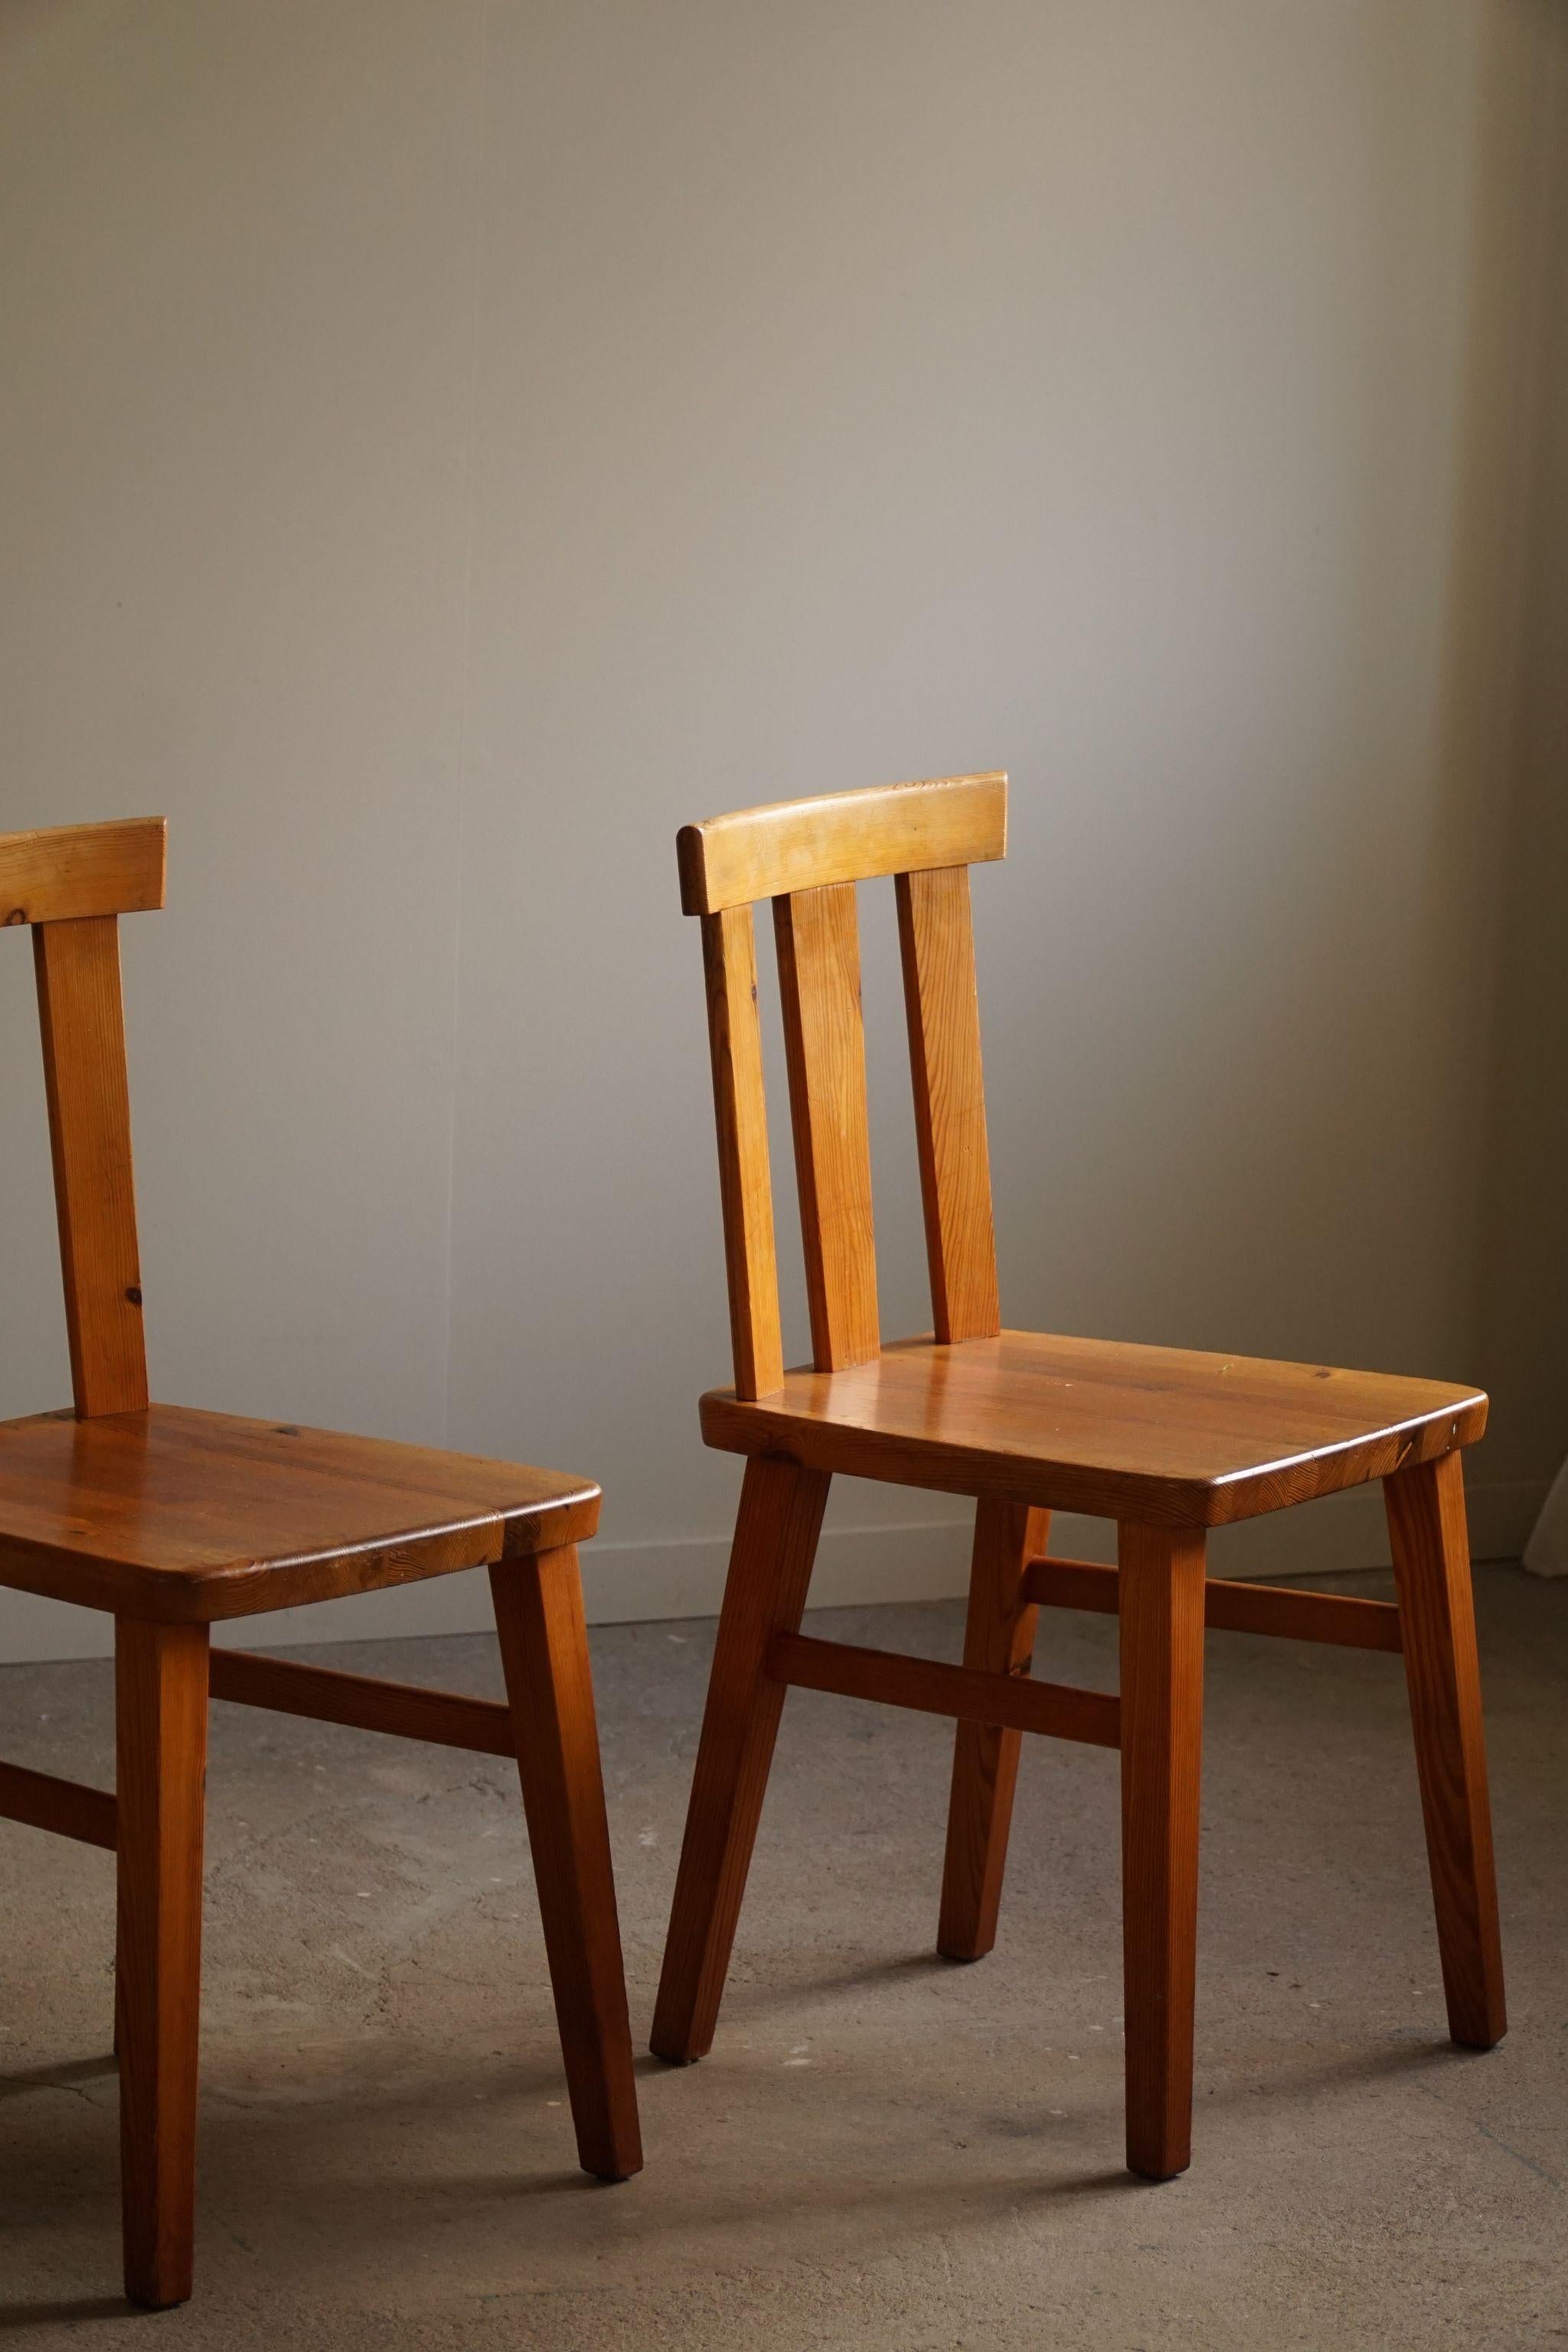 Swedish Modern, Set of 4 Chairs in Solid Pine, Axel Einar Hjorth Style, 1950s For Sale 10